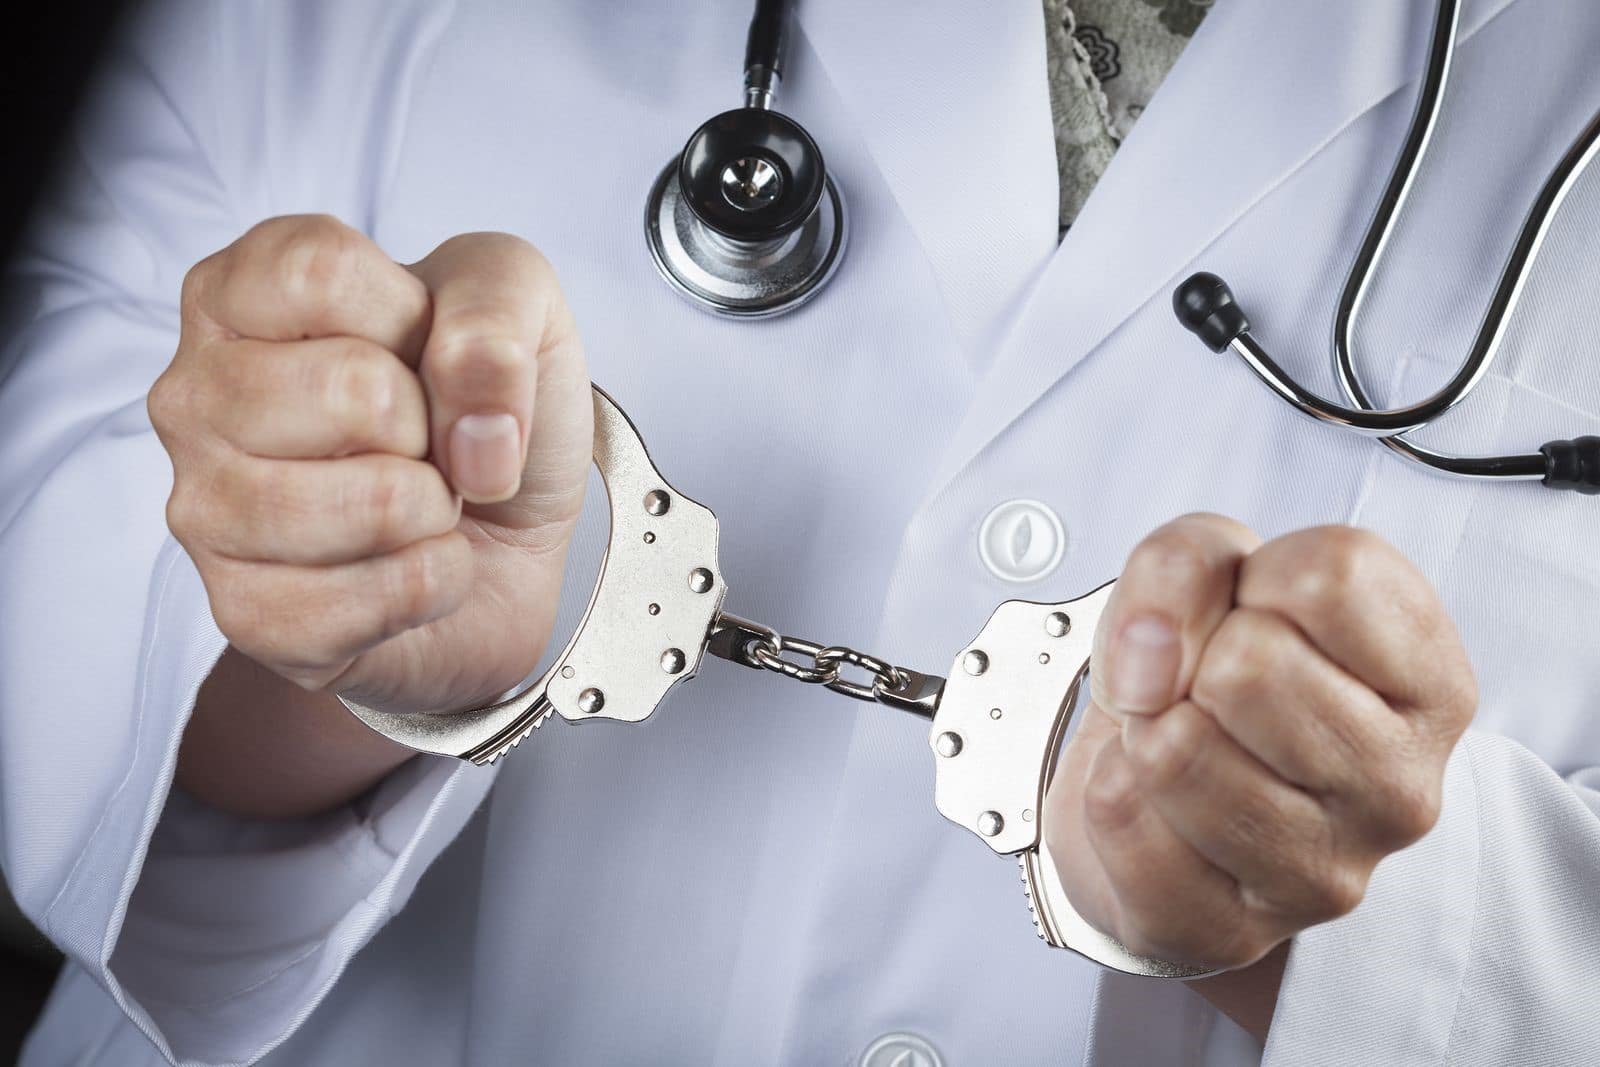 Let a Medical Malpractice Attorney Help Get The Justice You Deserve